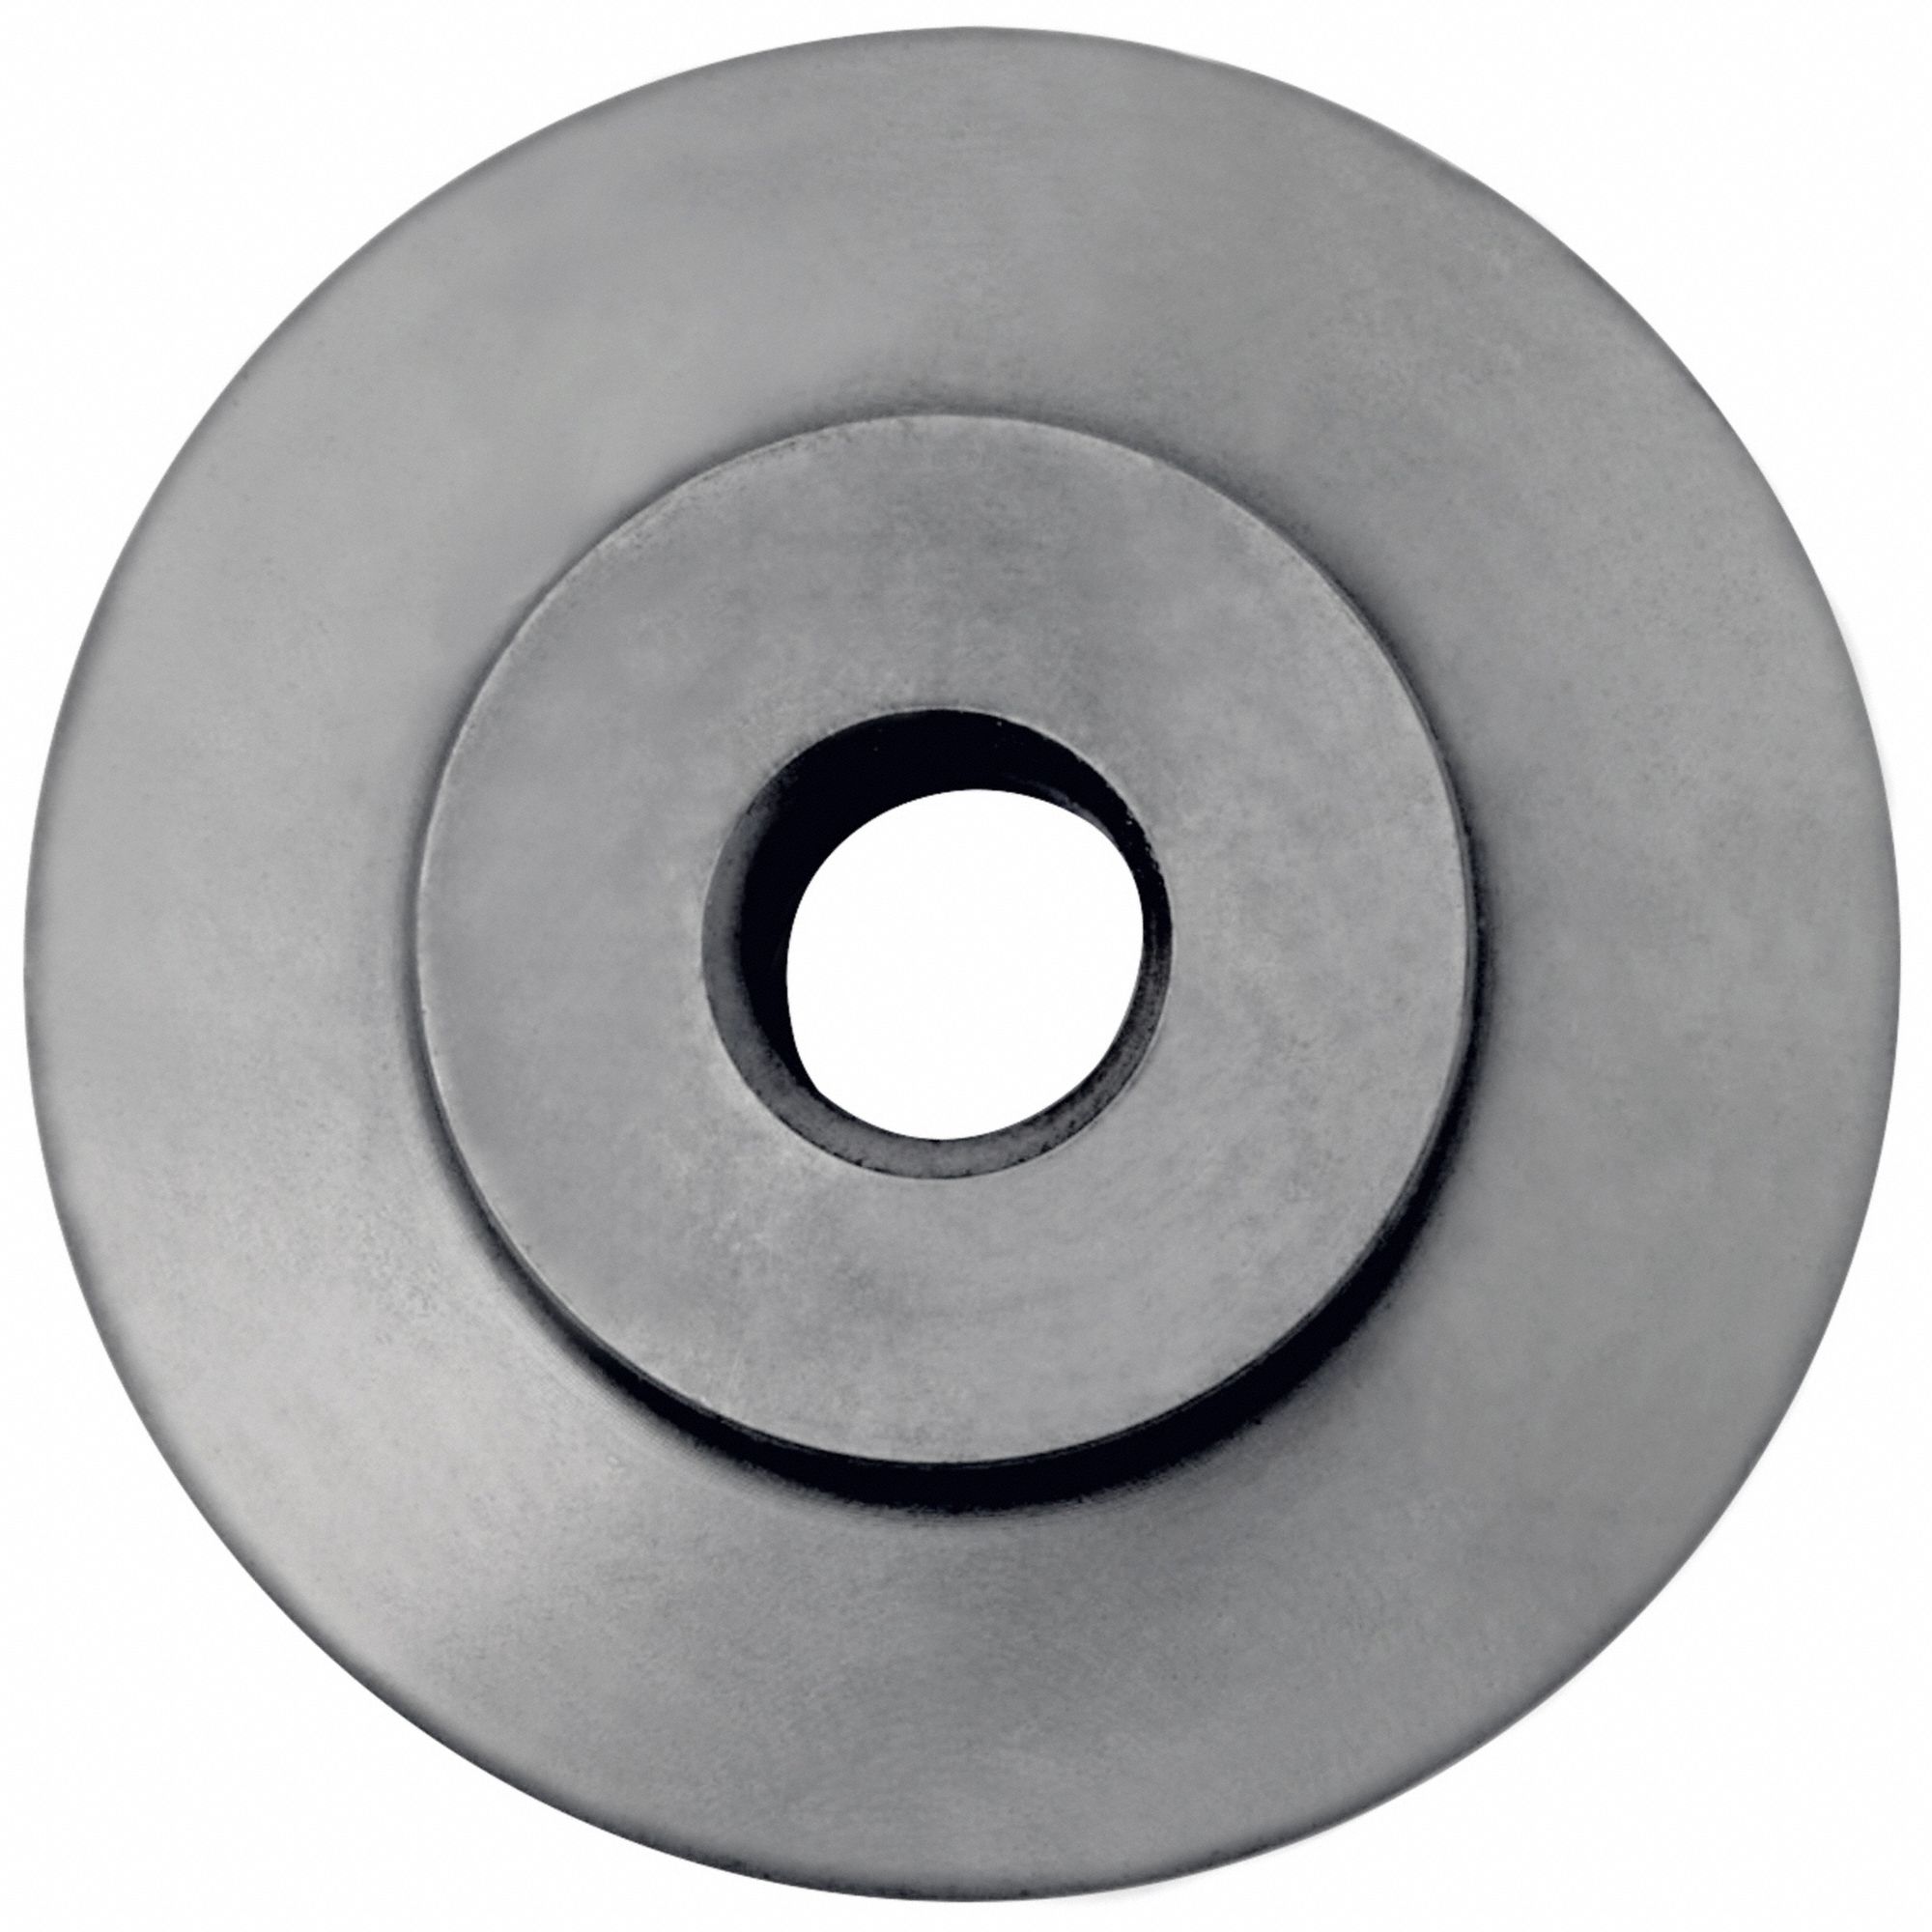 Replacement Cutter Wheel: Cuts Steel, For Mfr No. H61/H8I, 13/32 in Overall Lg